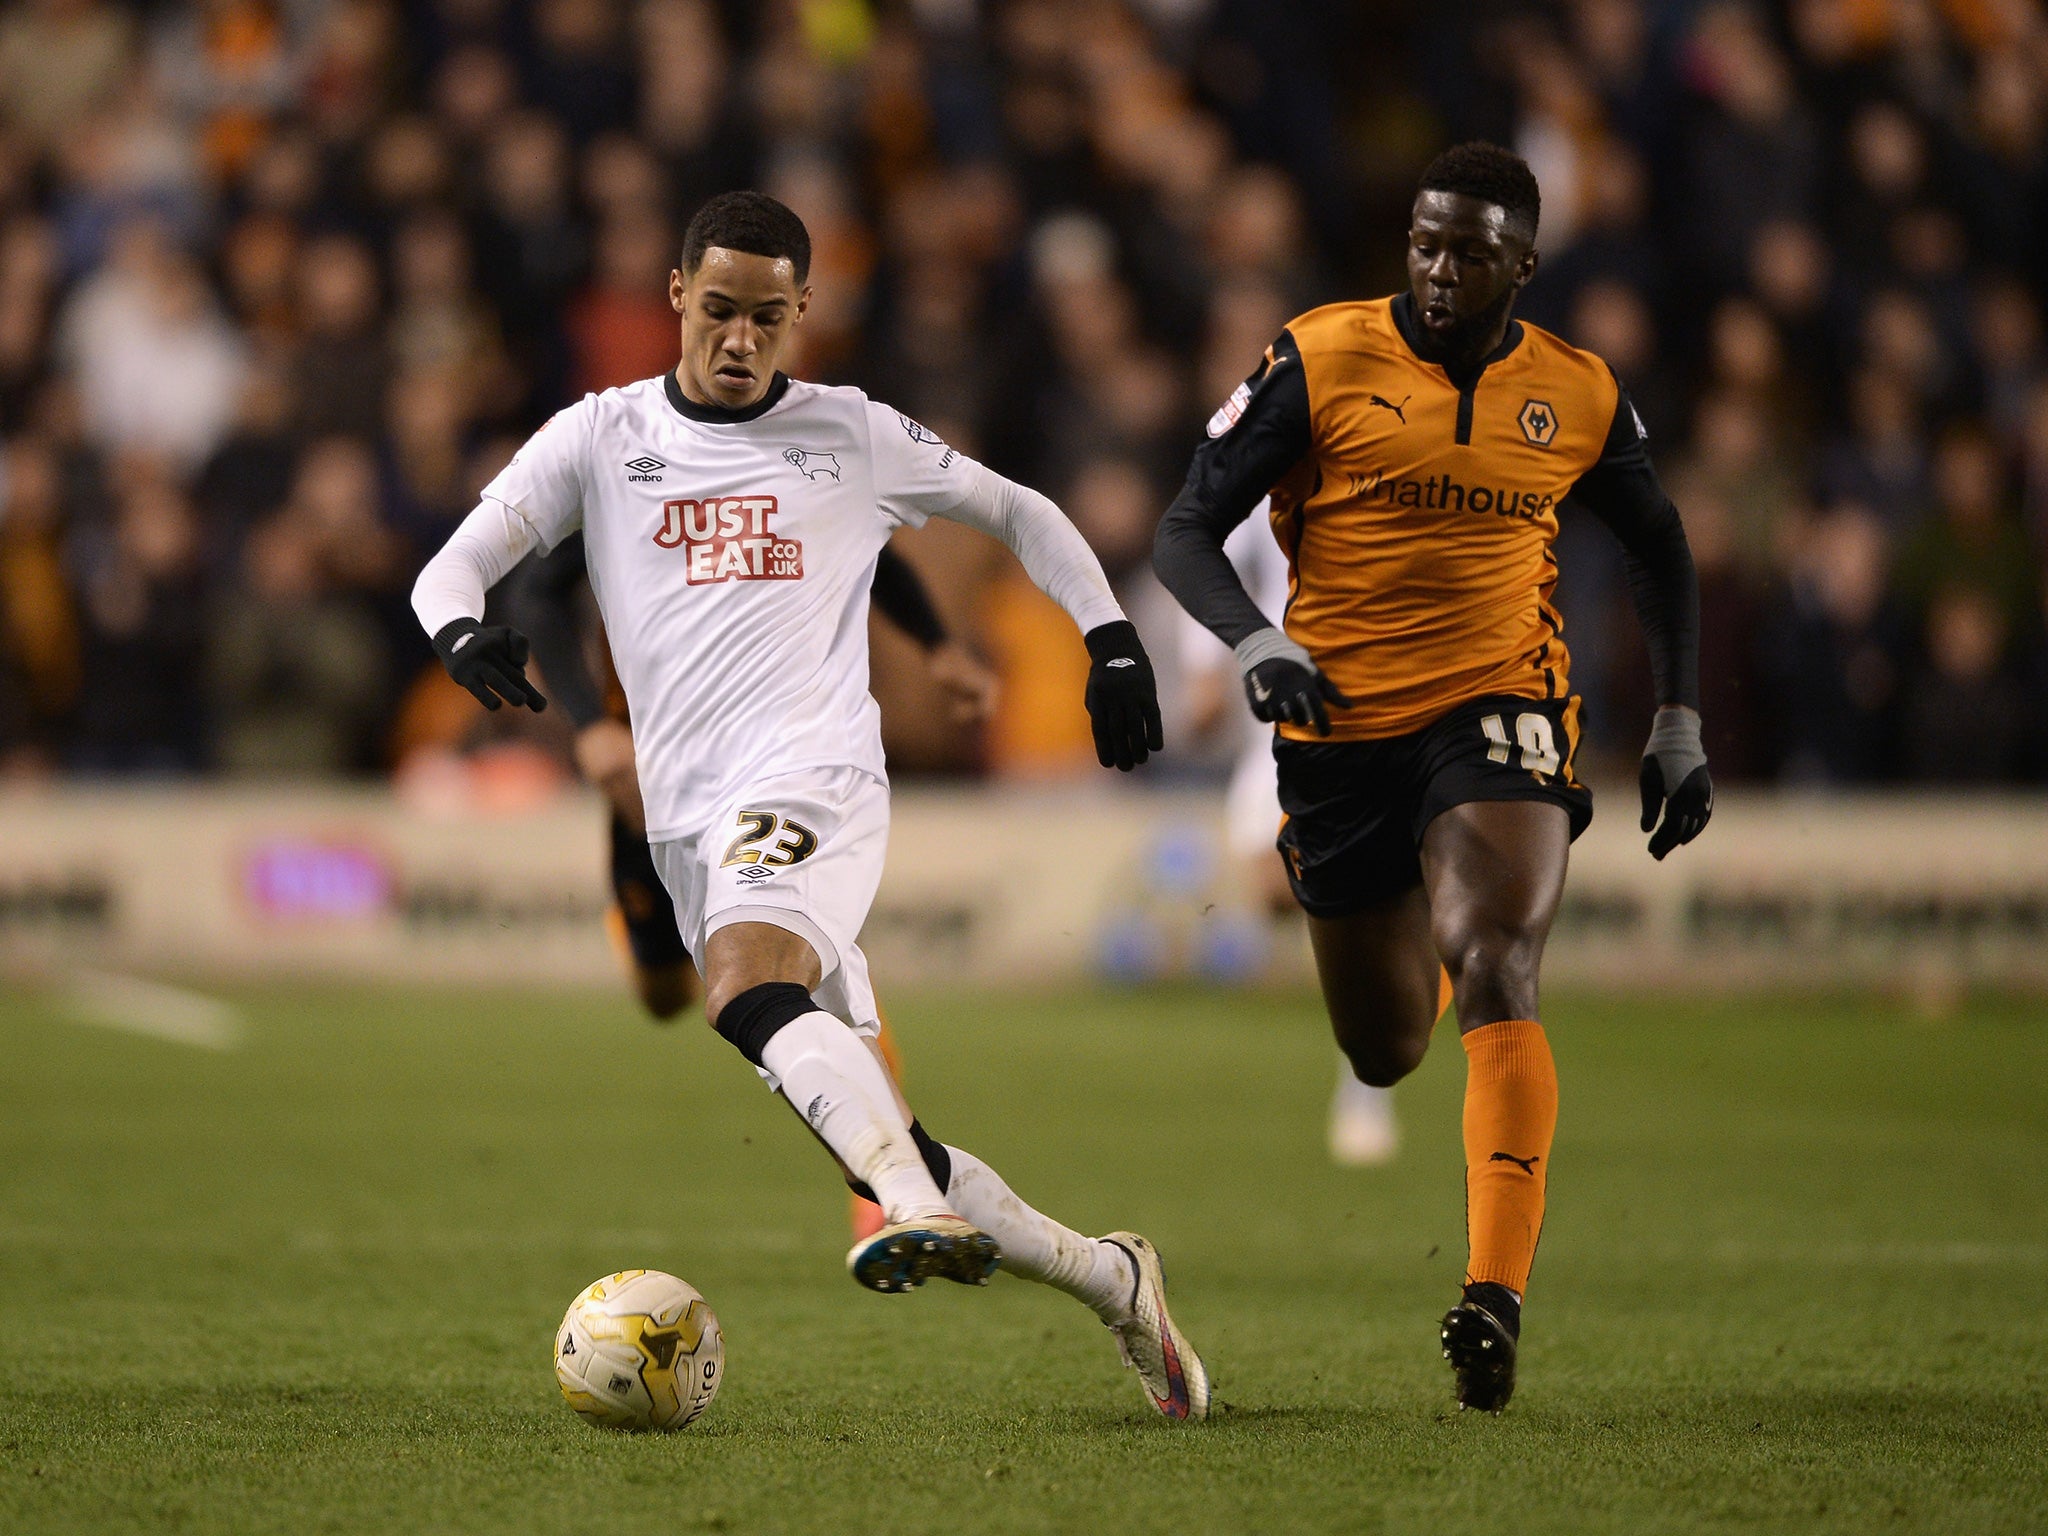 Tom Ince had a goal disallowed during a disastrous night for Derby County